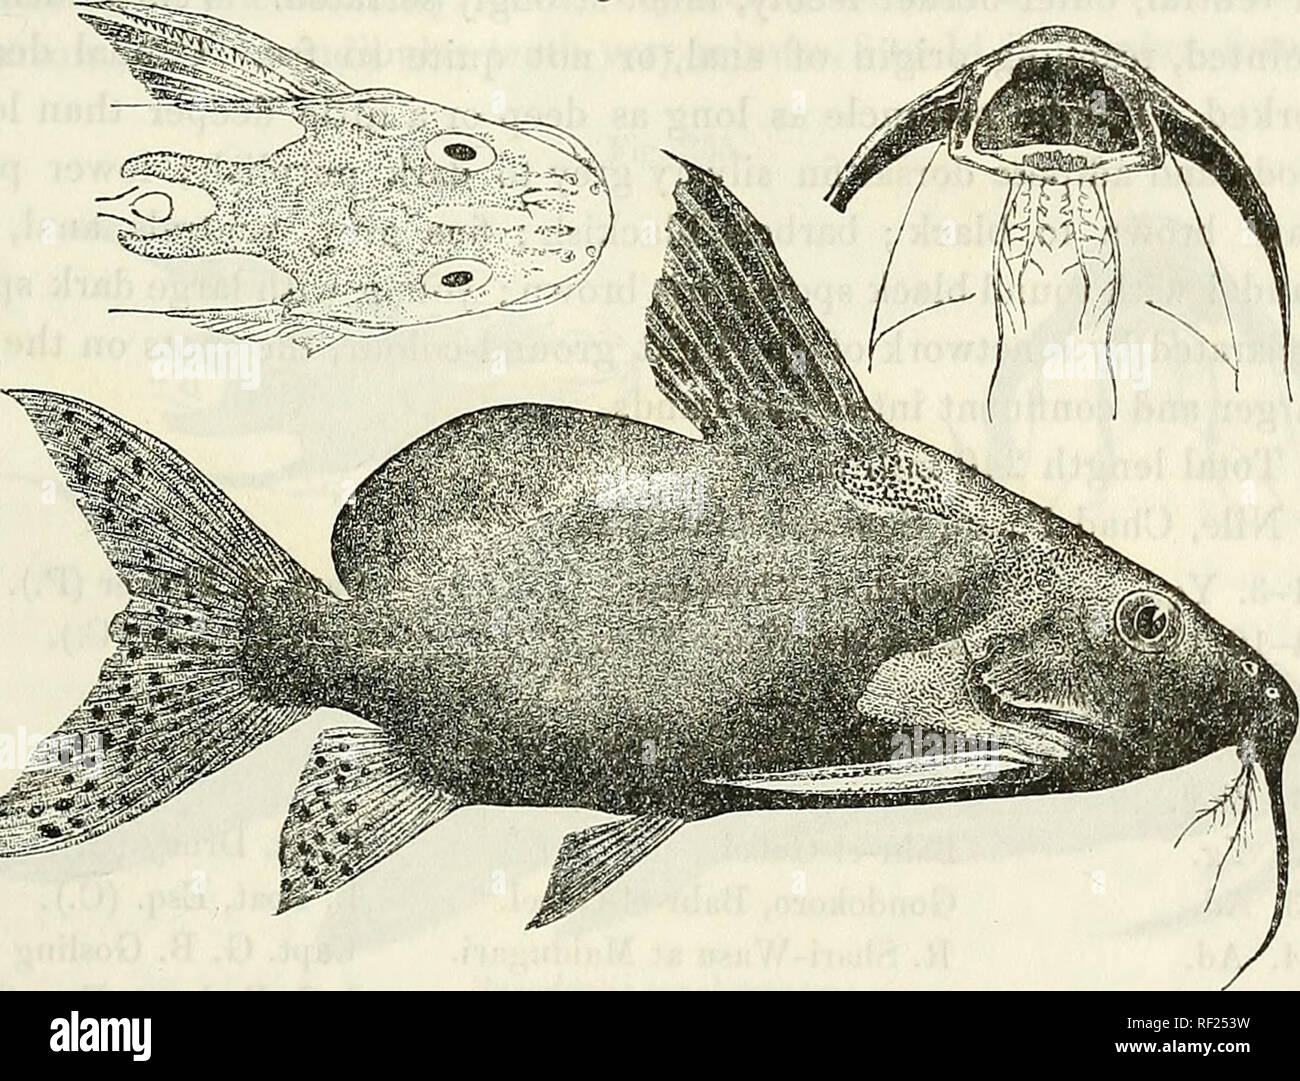 . Catalogue of the fresh-water fishes of Africa in the British Museum (Natural History). British Museum (Natural History); Fishes; Freshwater animals. SYNODONTIS. 473 Synodontis melanogaster, Ehrenb. in Peters, Reise n. Mossnmb. iv. p. 31 (1868). Synodontis membranaceus, Vaill. N. Arch. Mus. (3) viii. 1896, pp. 161 &amp; 167. Depth of body 2| to 3 times in total length, length of head 2| to 3J times. Head 1J to If times as long as broad, rugose, granulate above from between the eyes, the granulate area sometimes extending a little on the snout; snout obtusely pointed, as long as or a little lo Stock Photo